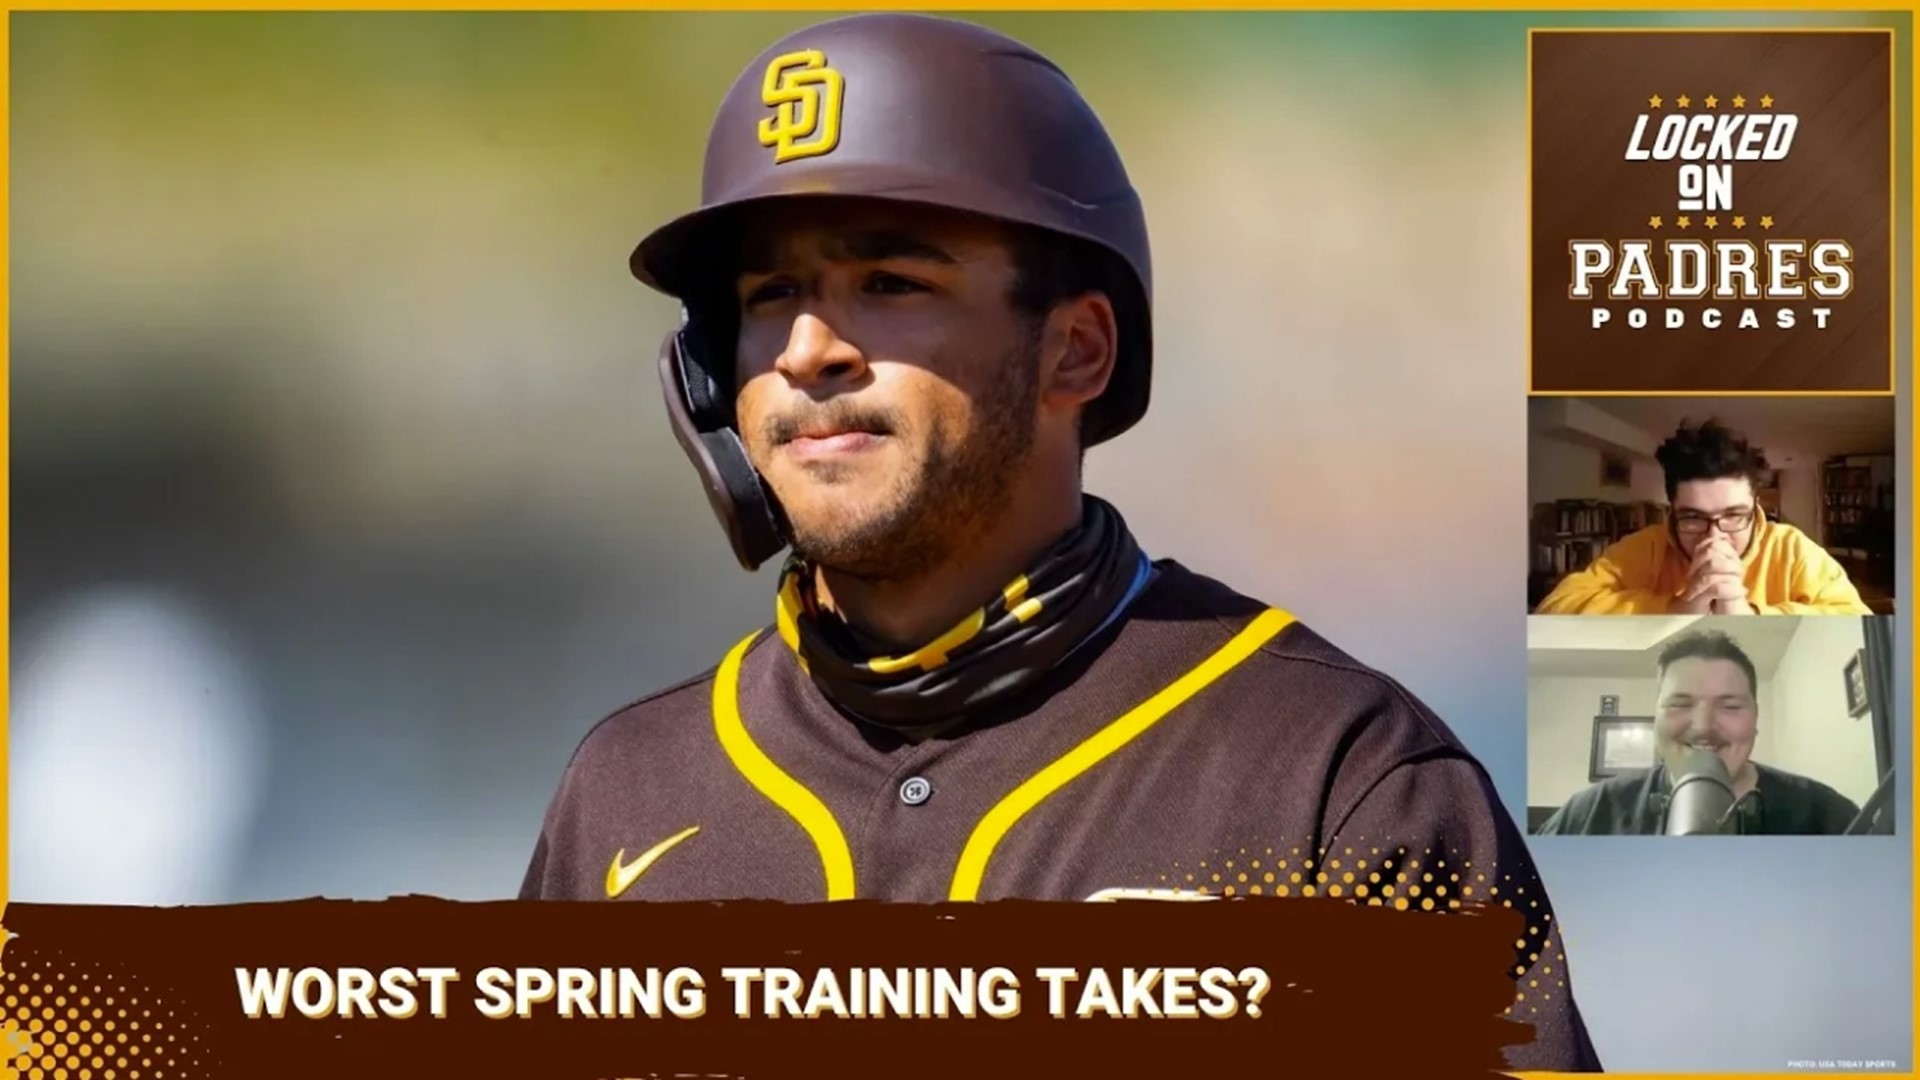 We're still training in the Spring! On today's episode, Javi is joined by recurring guest Rylan Stiles (host of Locked On Royals) to recaps the latest MLB news